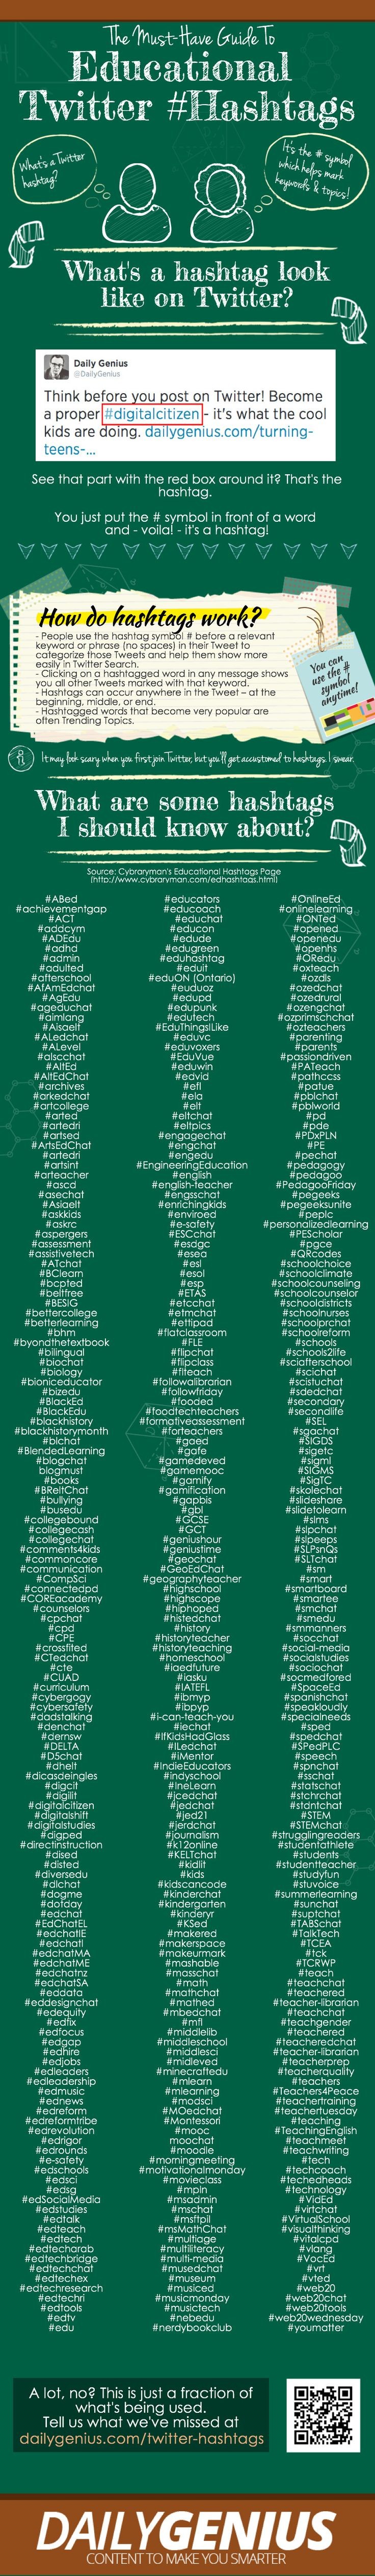 Guide to Educational Hashtags on Twitter  #CCSDTec...